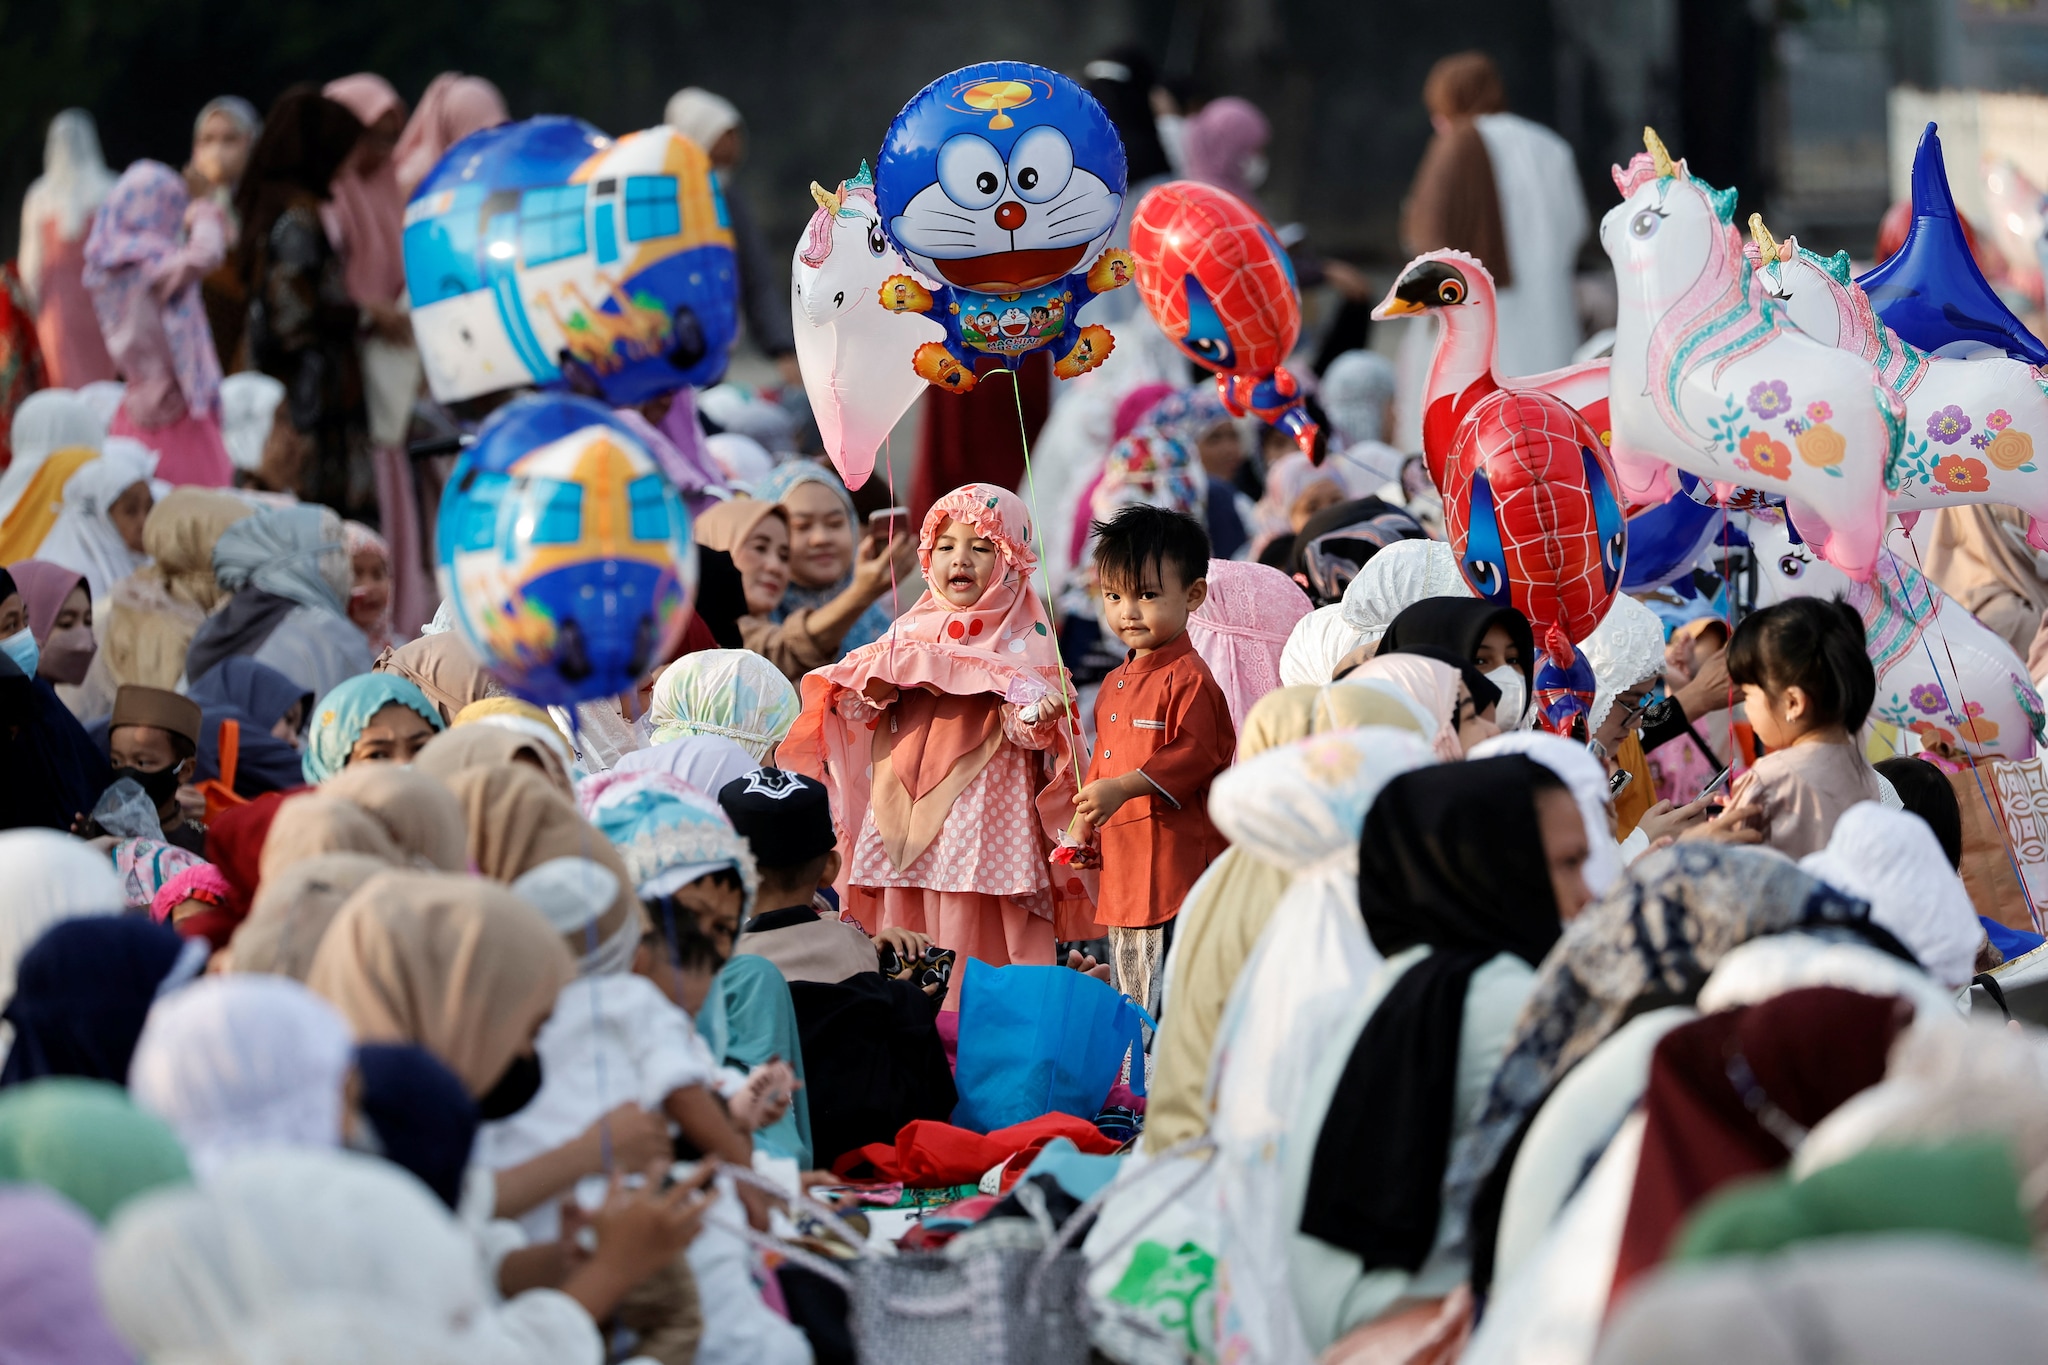 Muslim children hold balloons while attending mass prayers at the Sunda Kelapa port during Eid al-Fitr, marking the end of the holy fasting month of Ramadan, in Jakarta, Indonesia, on Monday. (Image: Reuters)